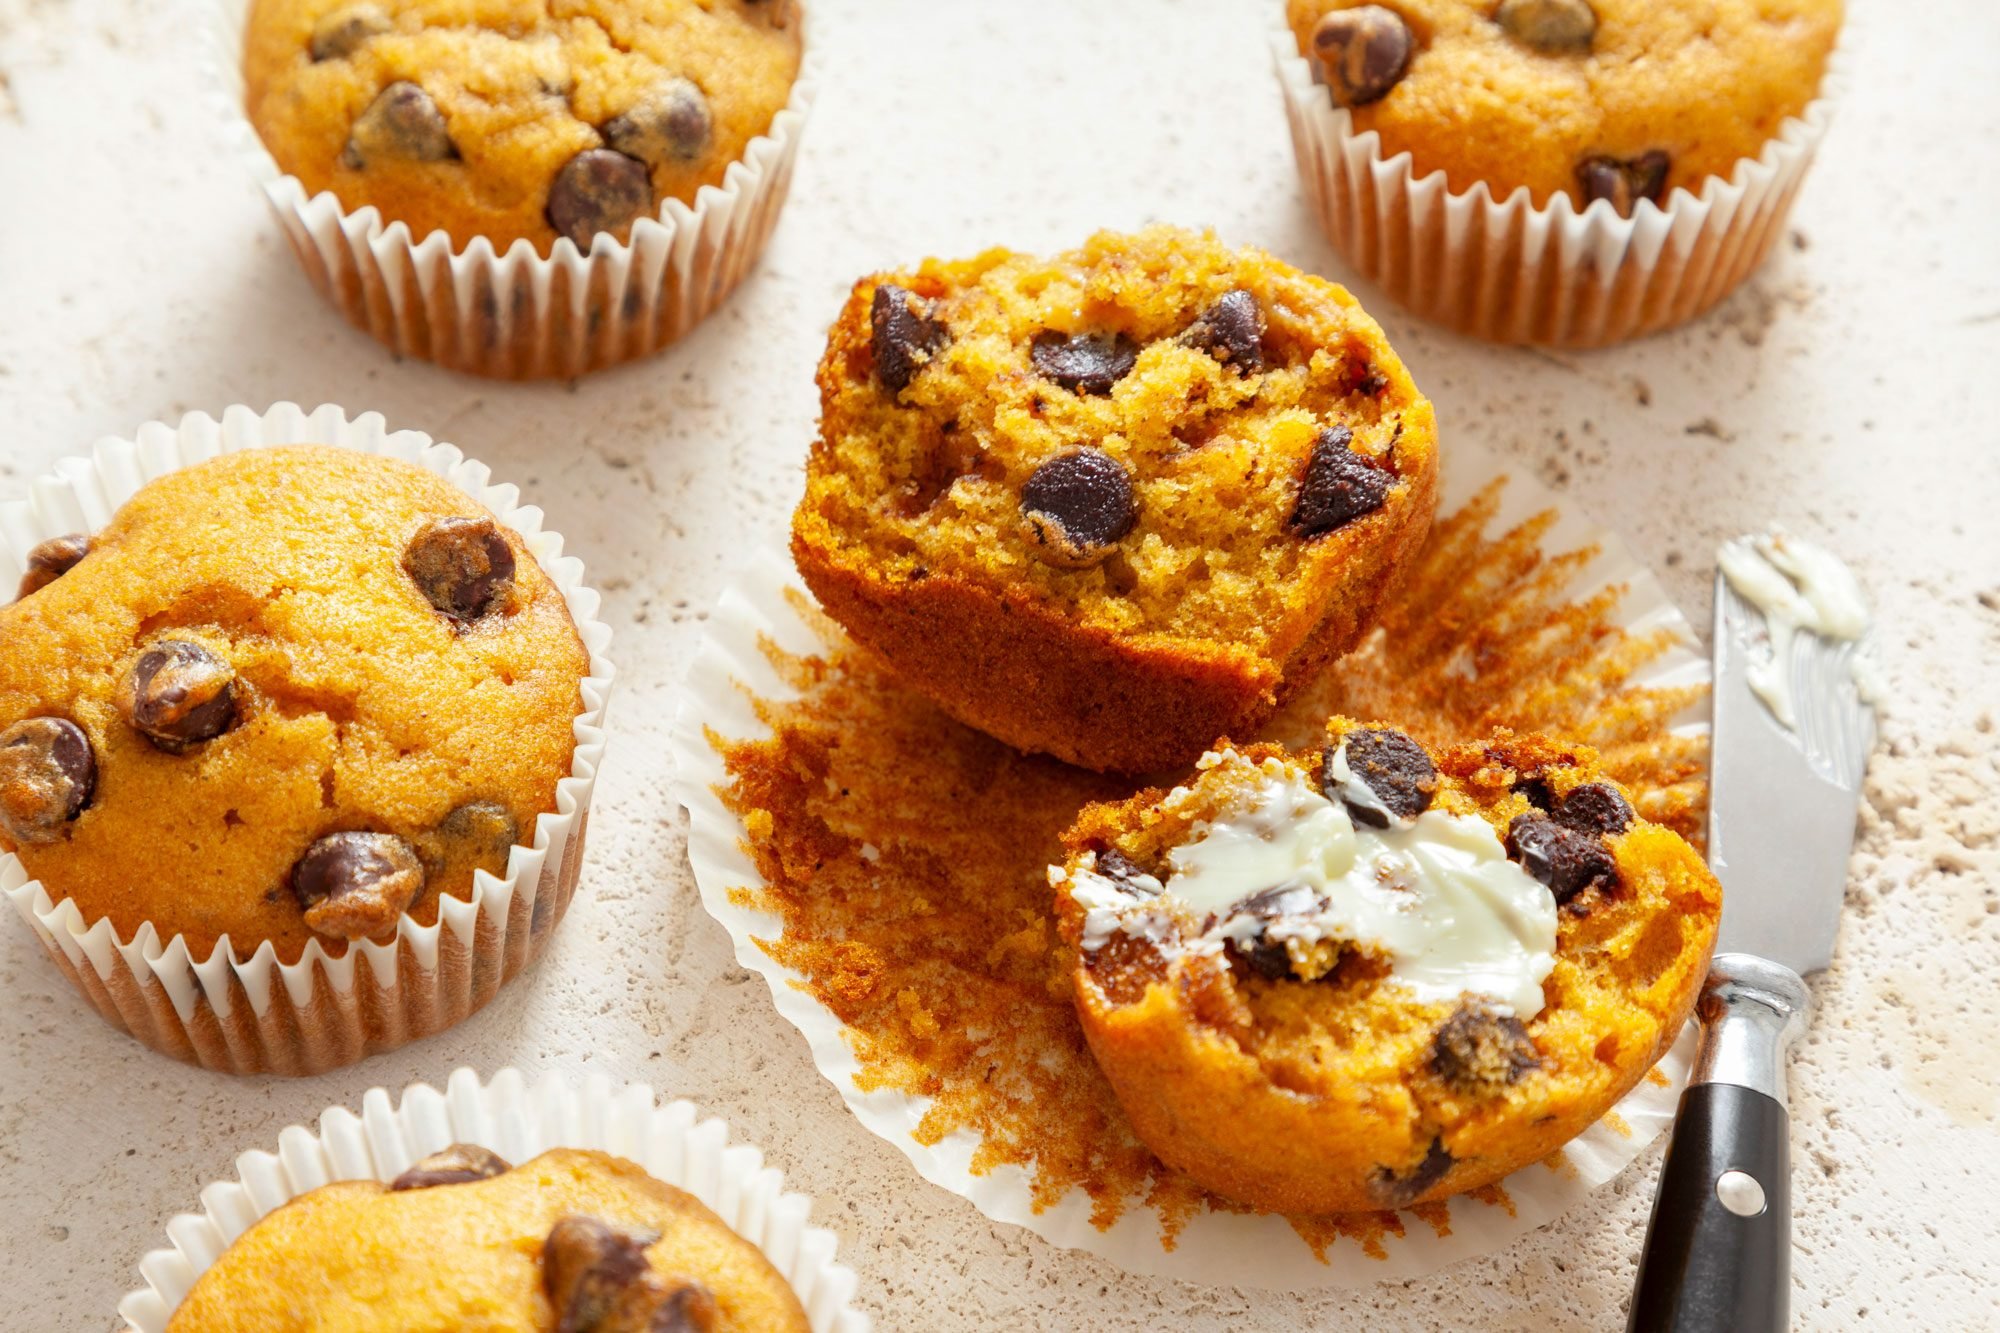 Pumpkin Chocolate Chip Muffins on Rough White Surface